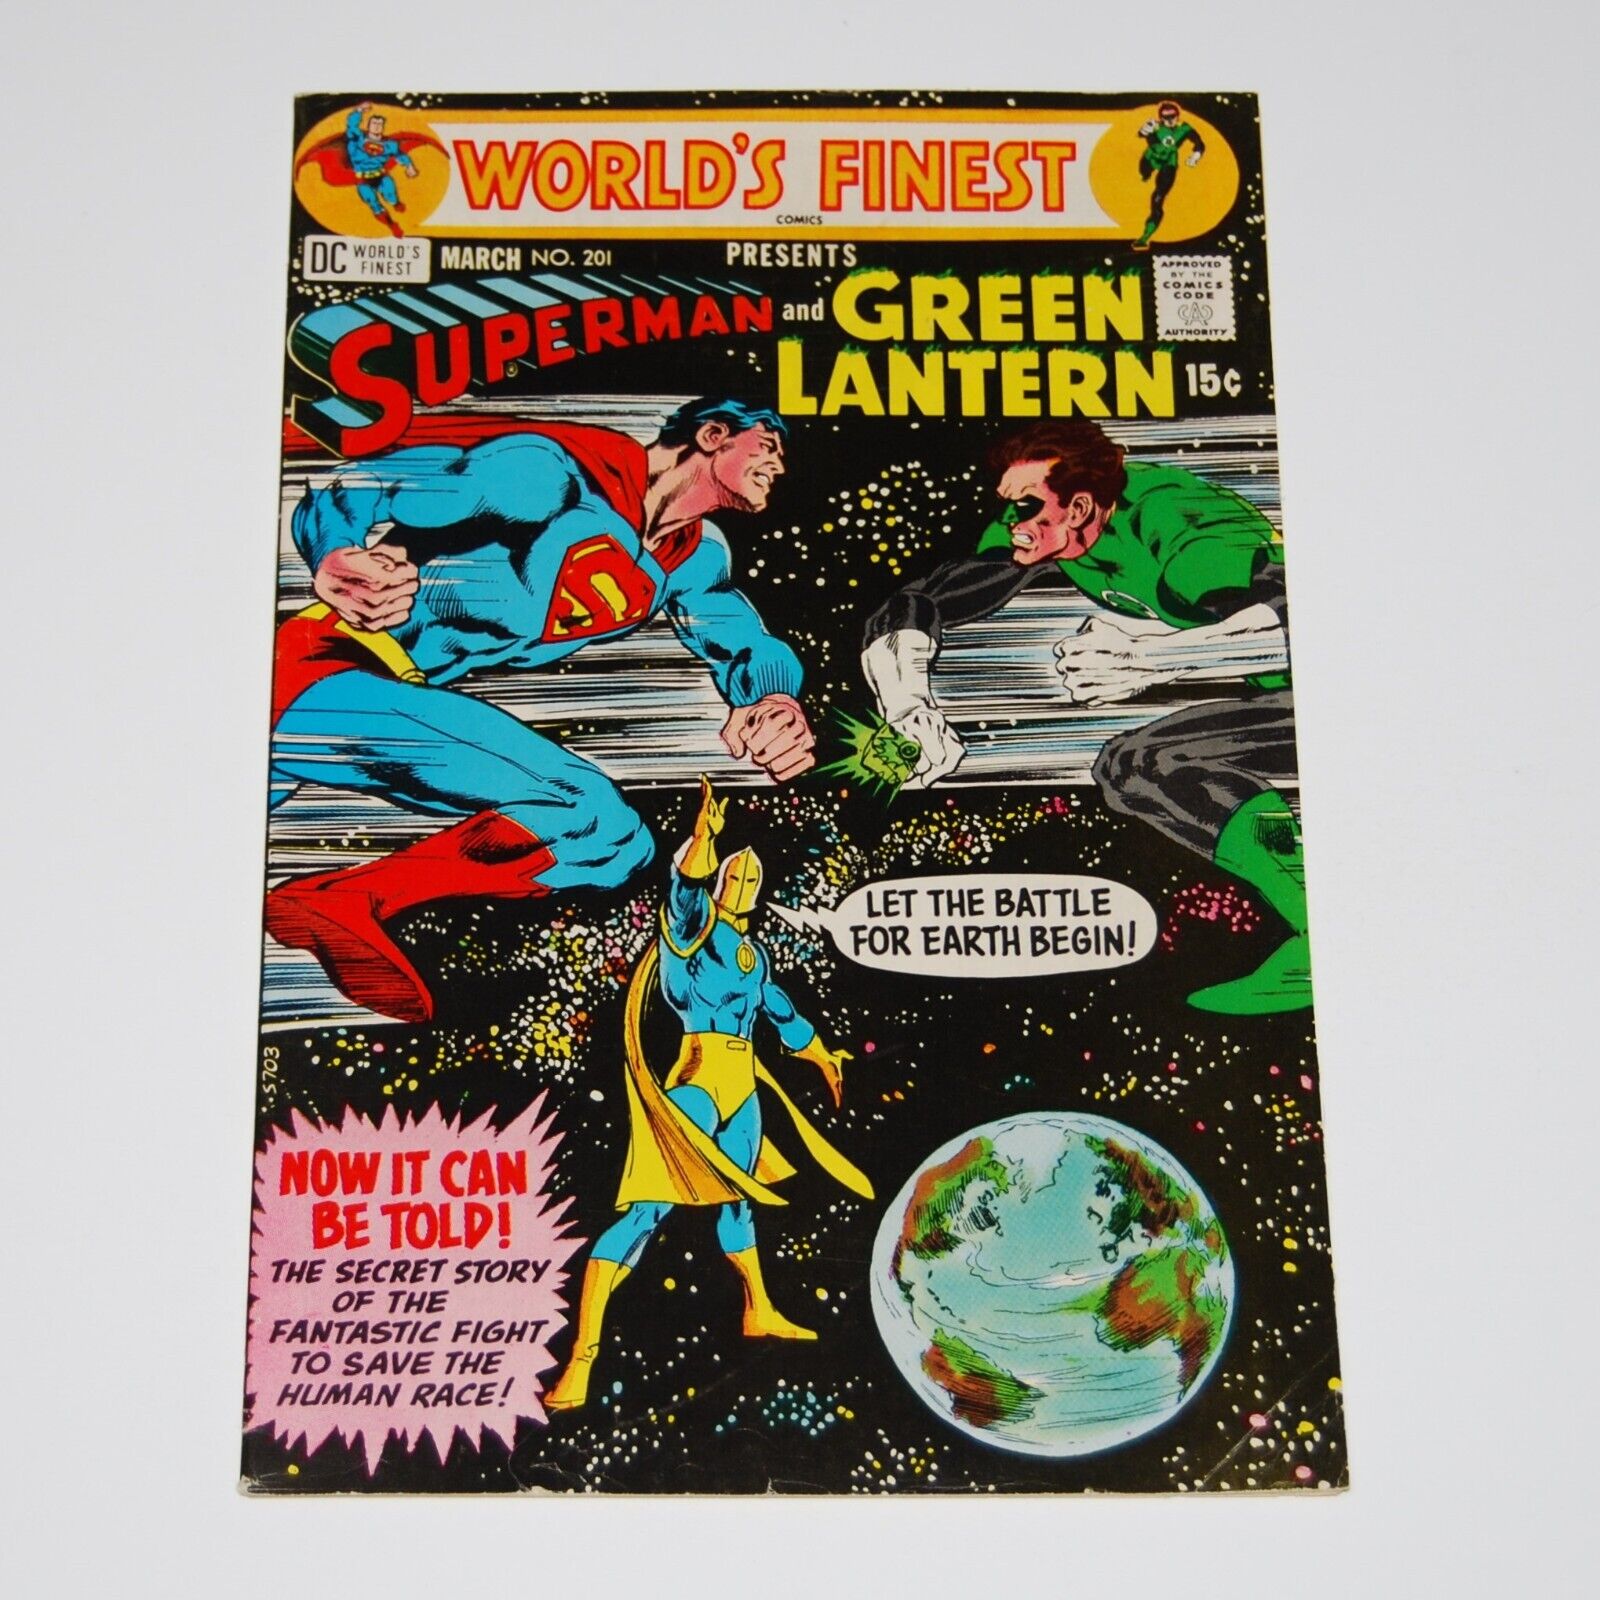 WORLD\'S FINEST 201 (DC, Mar 1971) - 6.0 FN condition